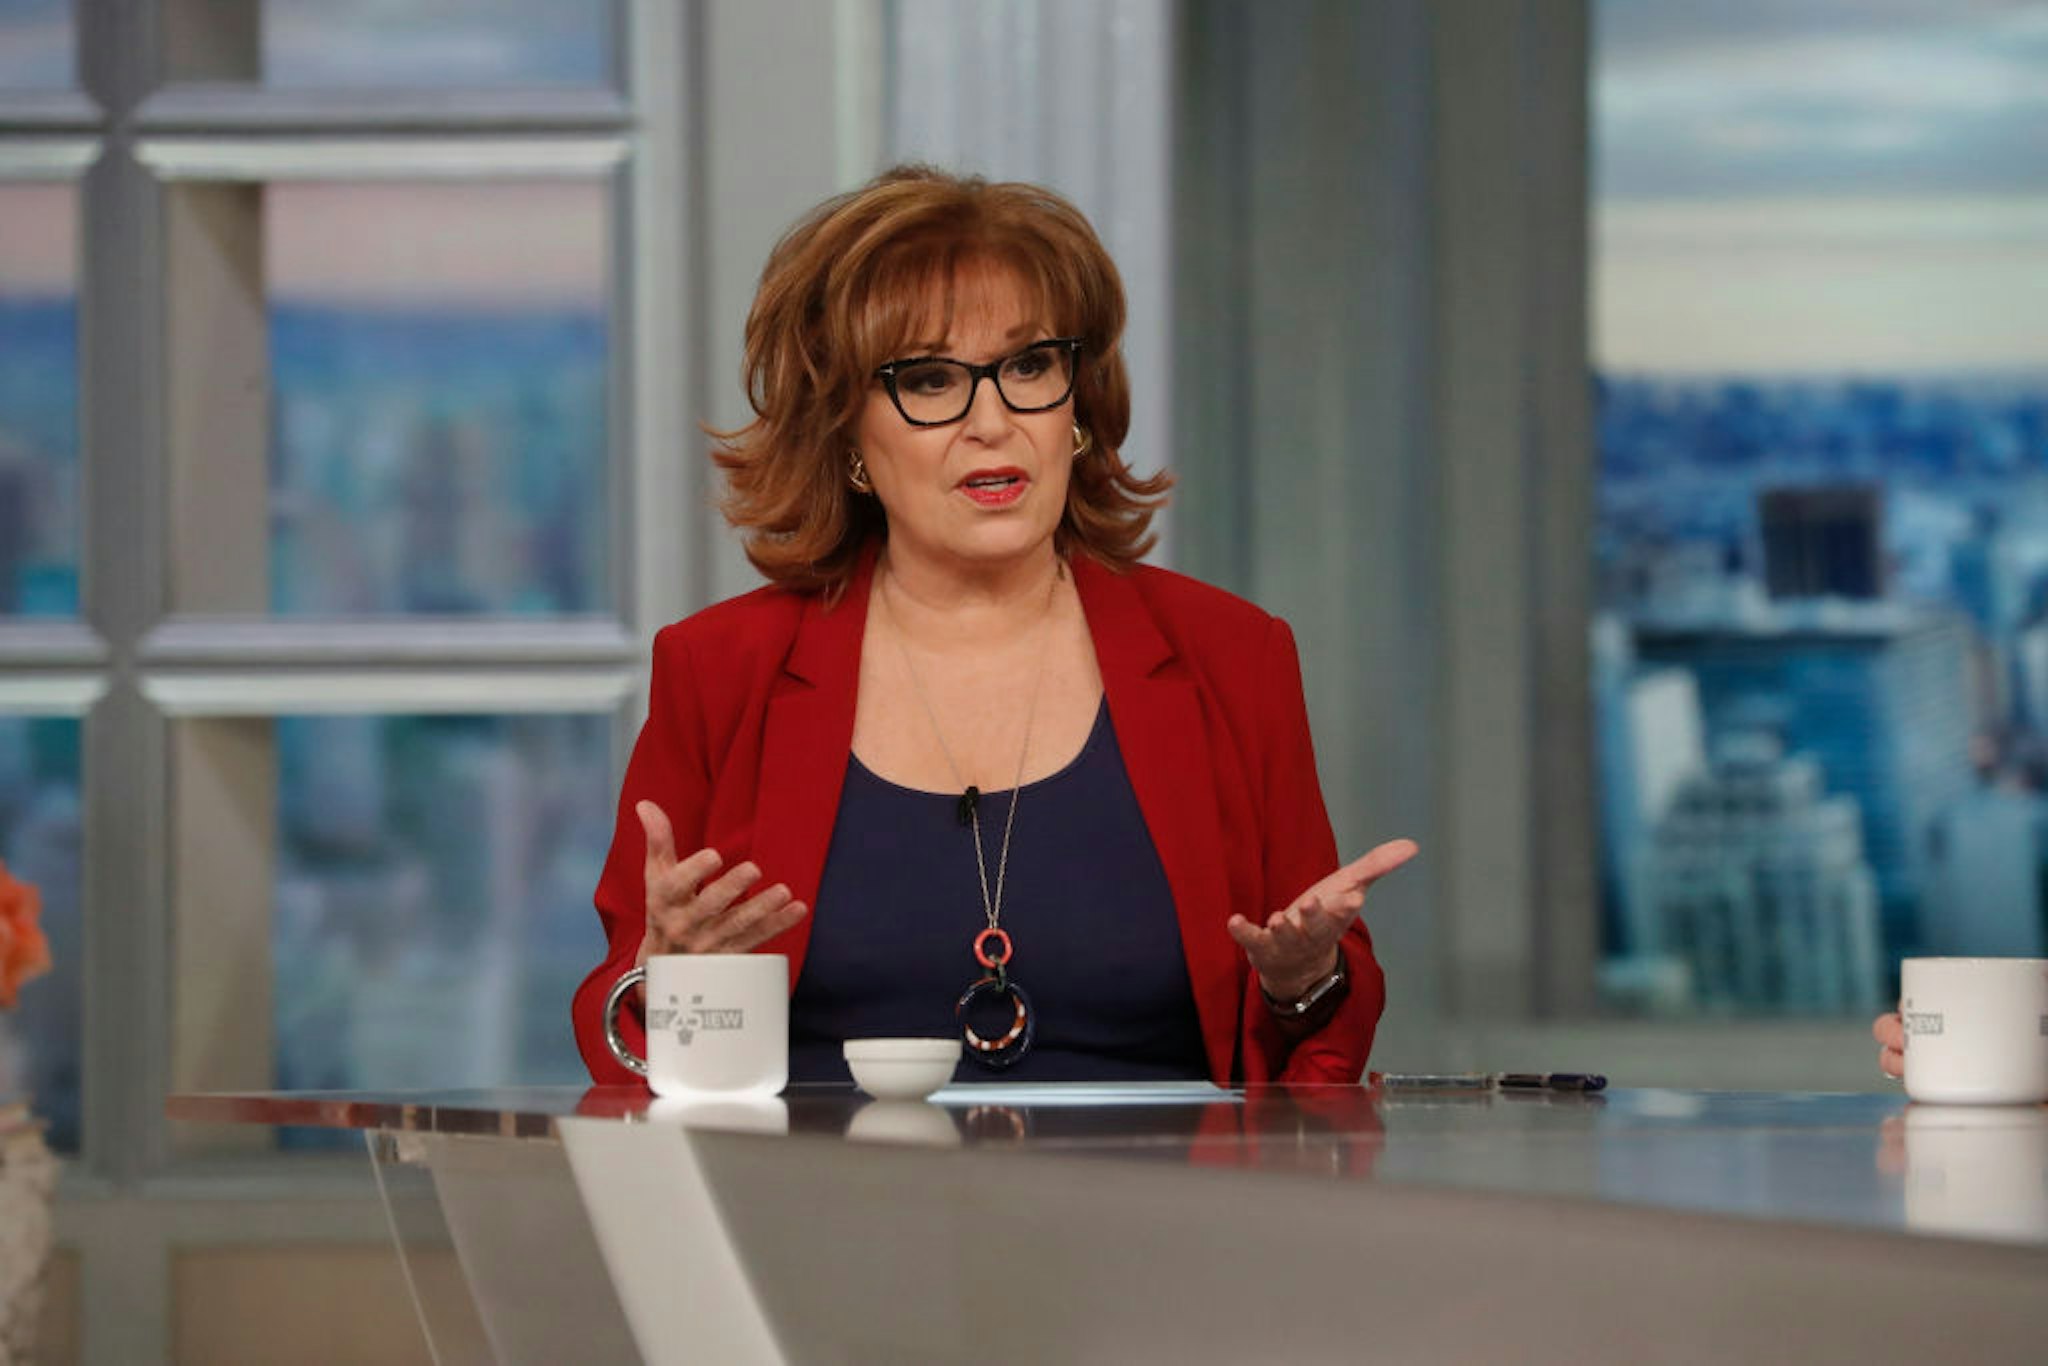 THE VIEW - 5/6/22 - Lindsay Granger is co-host and Senator Elizabeth Warren is a guest on The View on Friday, May 6, 2022. The View airs Monday-Friday, 11am-12pm ET on ABC. (Photo by Lou Rocco/ABC via Getty Images) JOY BEHAR